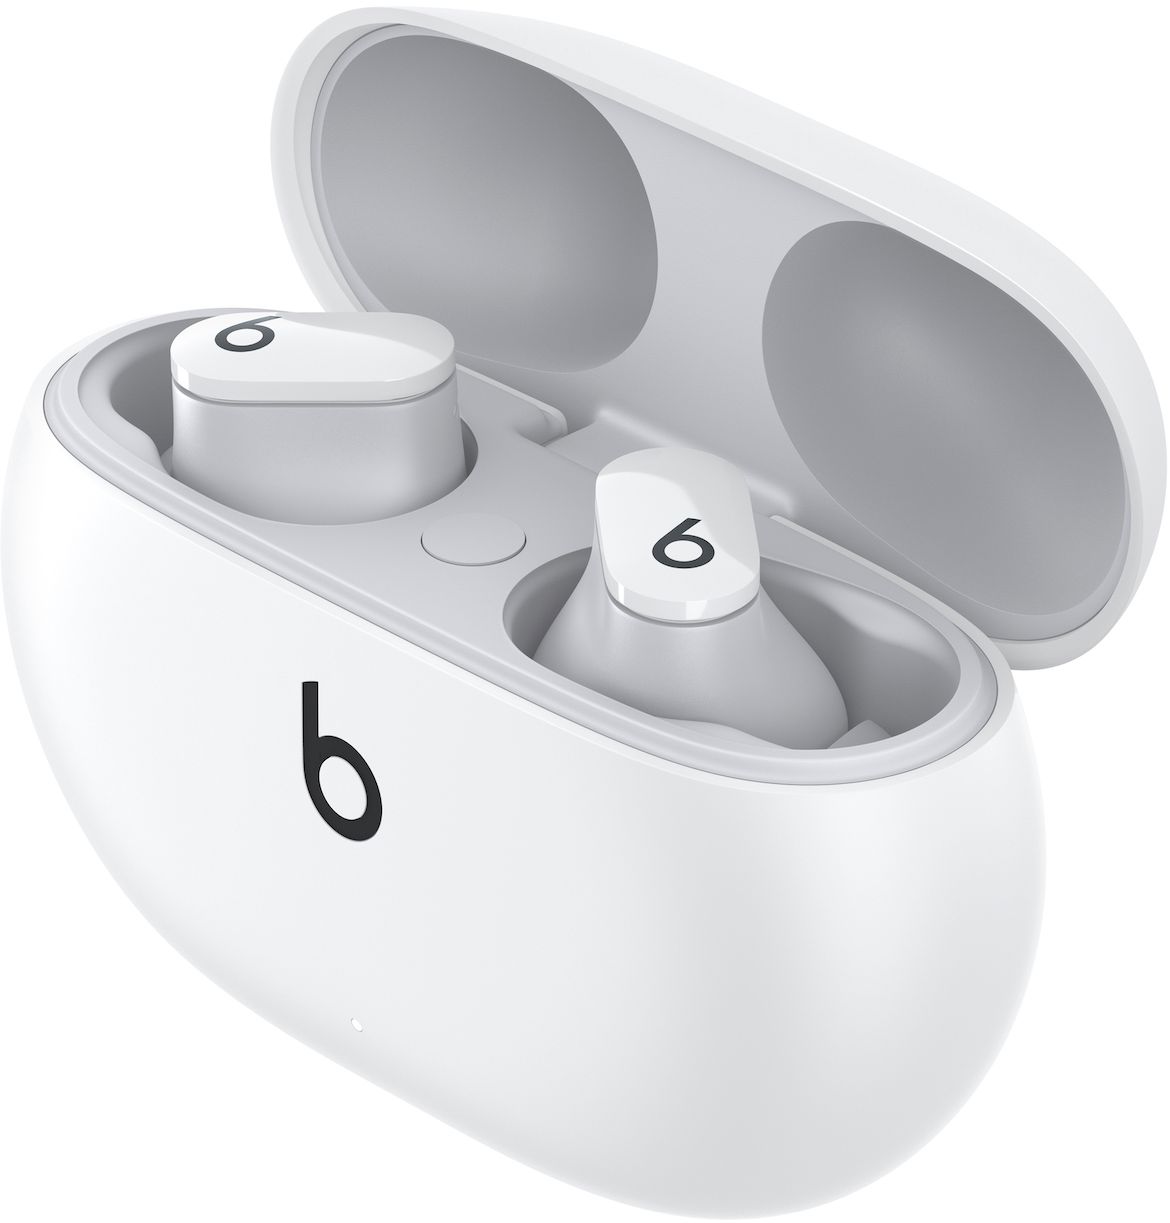 Beats by Dr. Dre Studio Buds Totally Wireless Cancelling Earbuds White MJ4Y3LL/A Best Buy